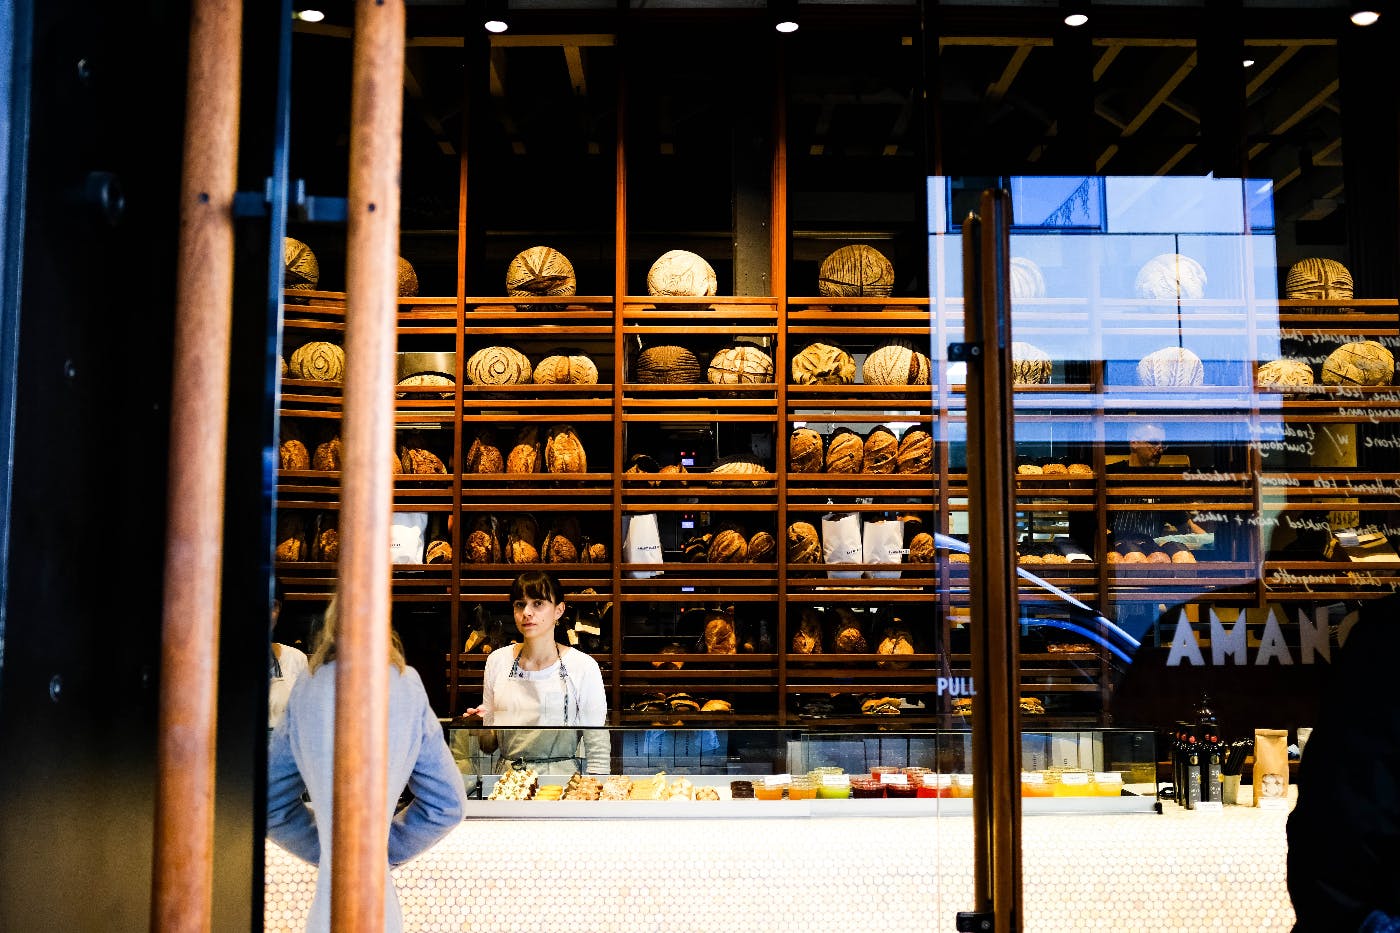 A view into a bakery with bread on shelves